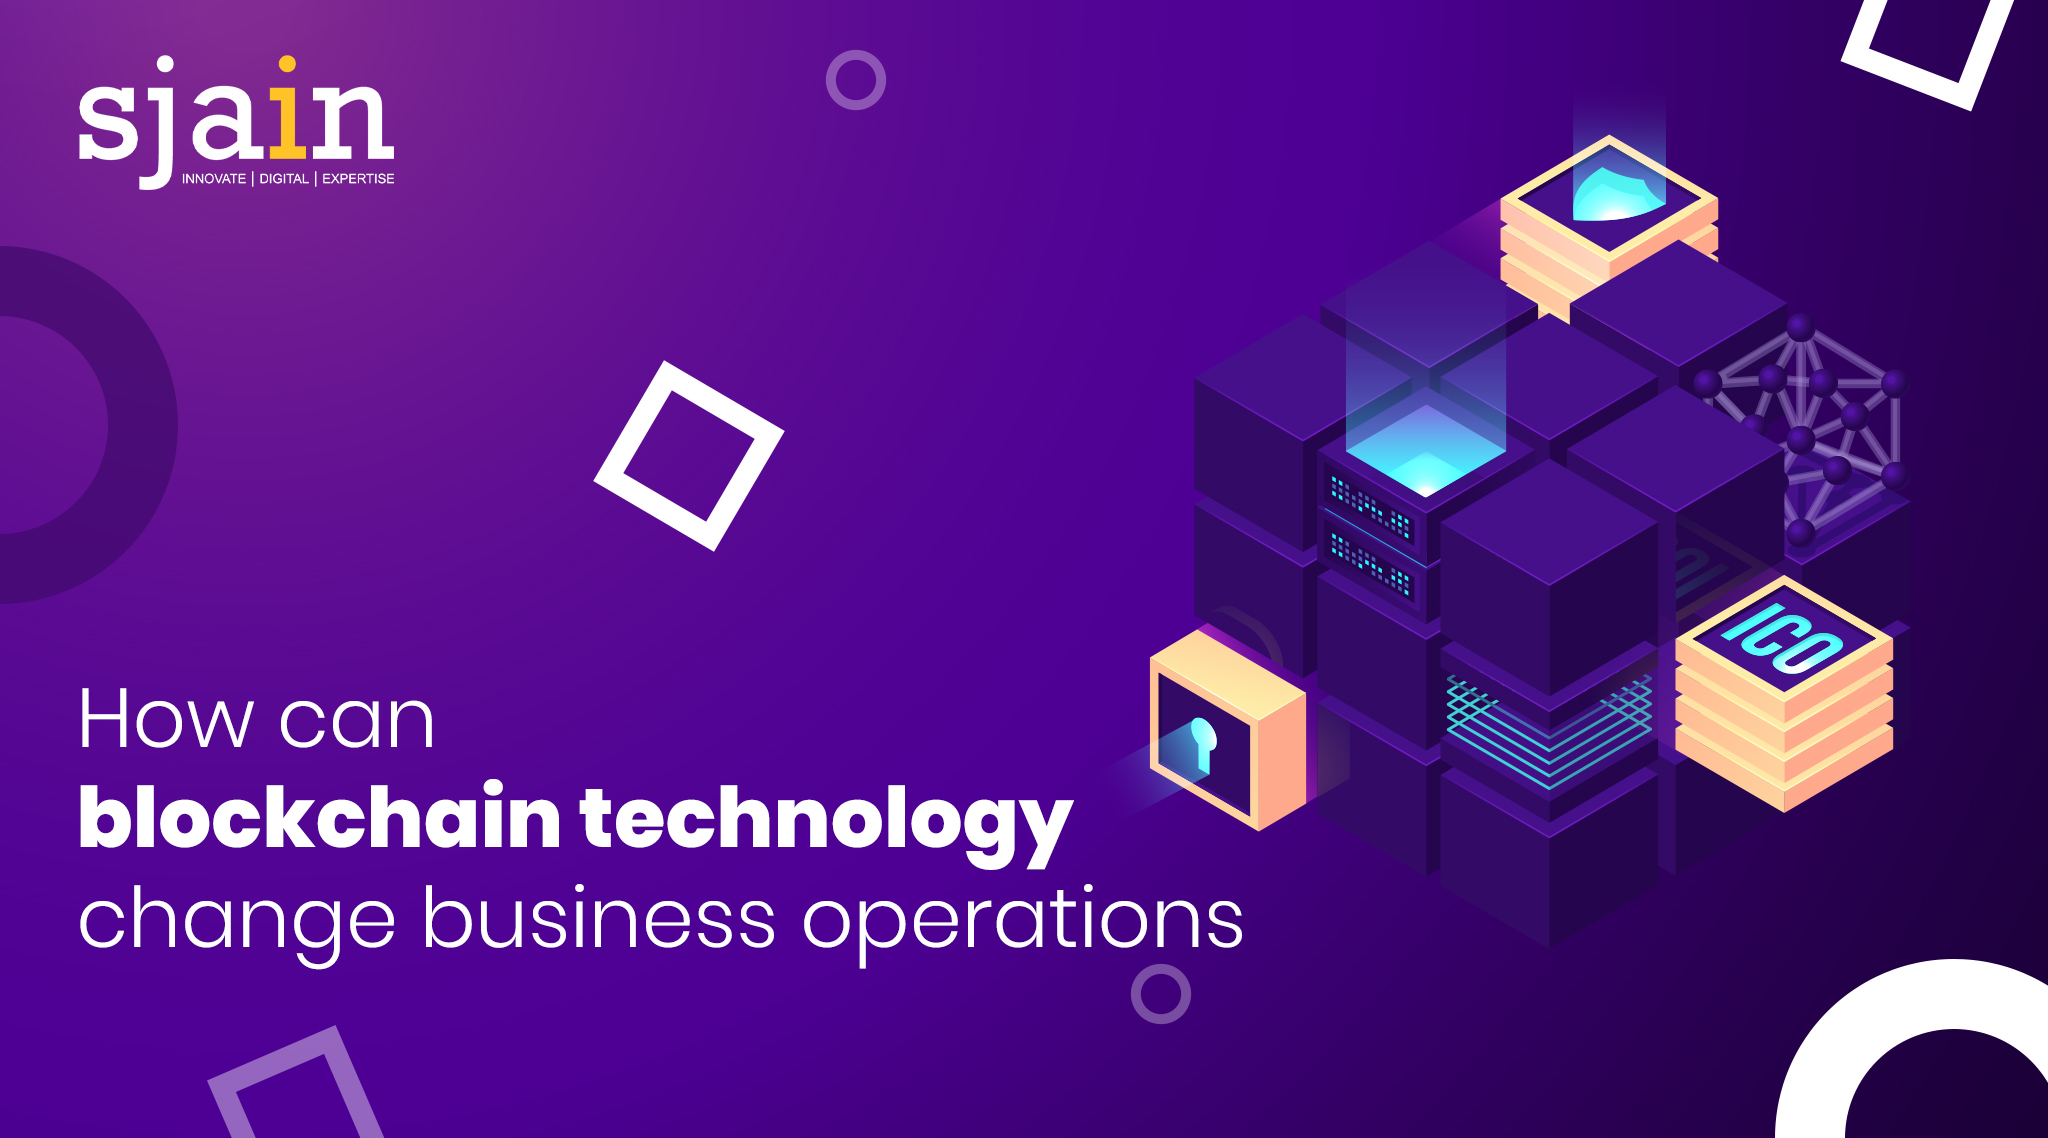 How can blockchain technology change business operations?